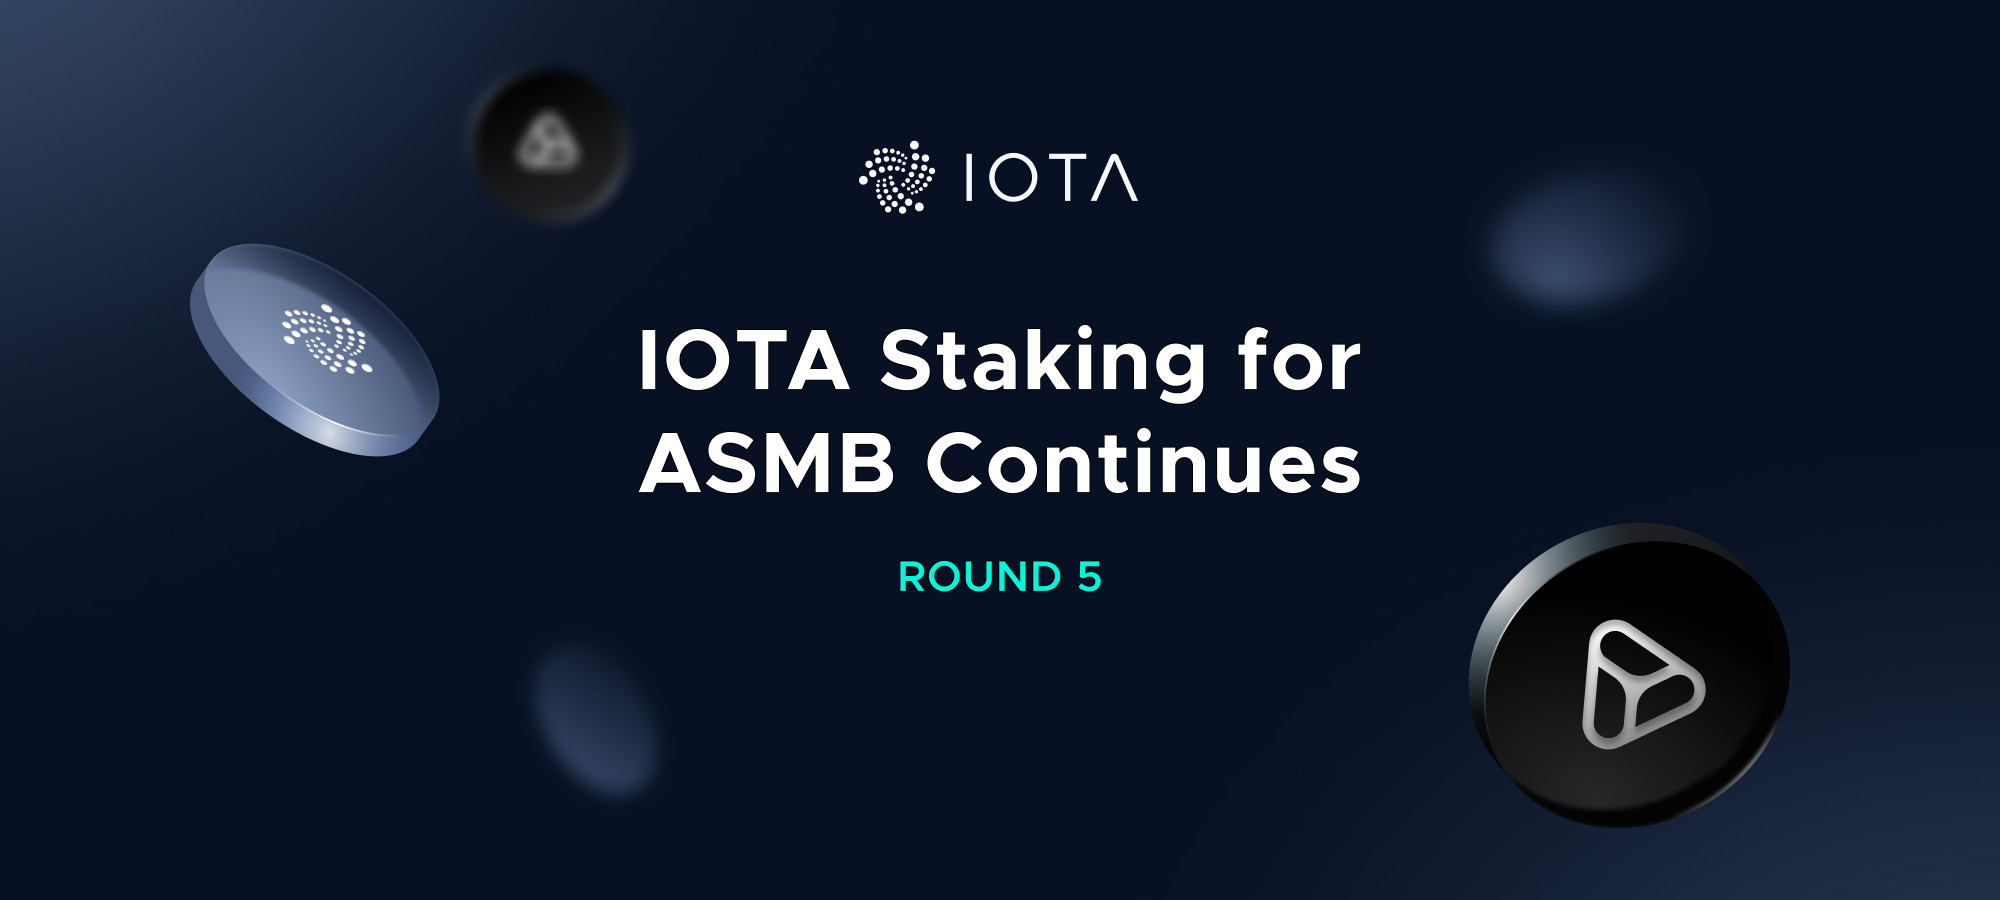 IOTA Staking for Assembly: Round 5